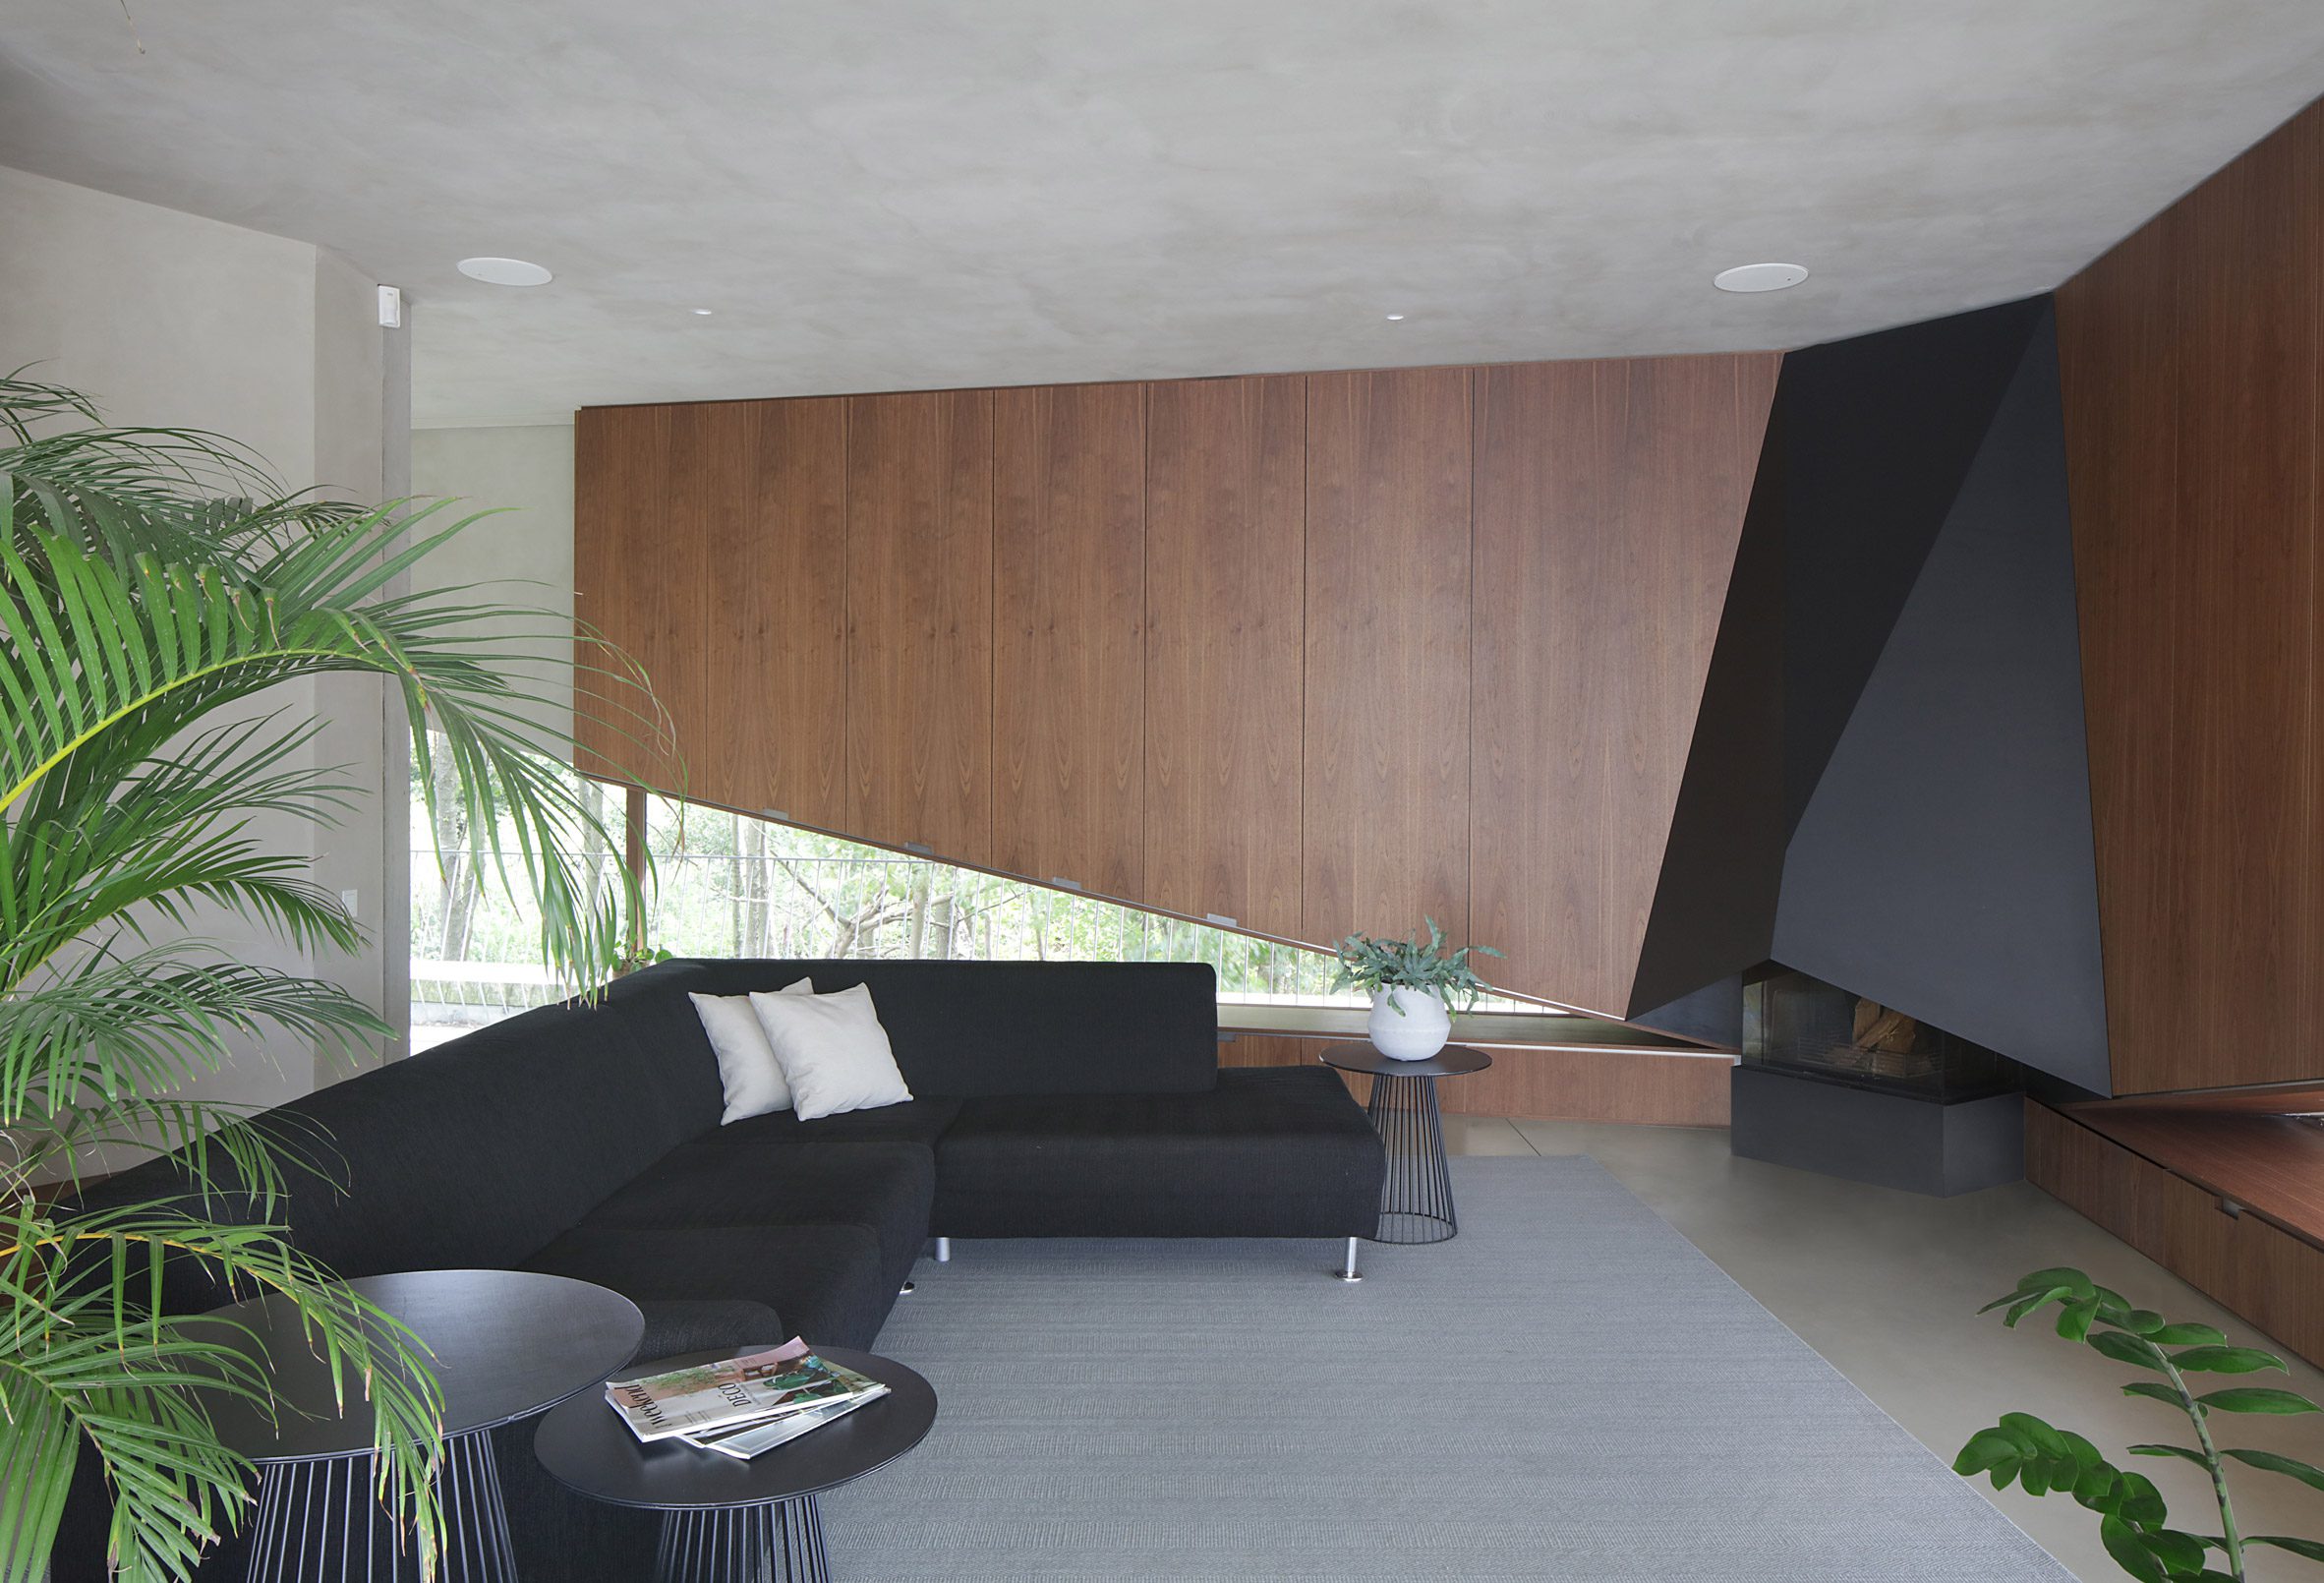 Living room in concrete house